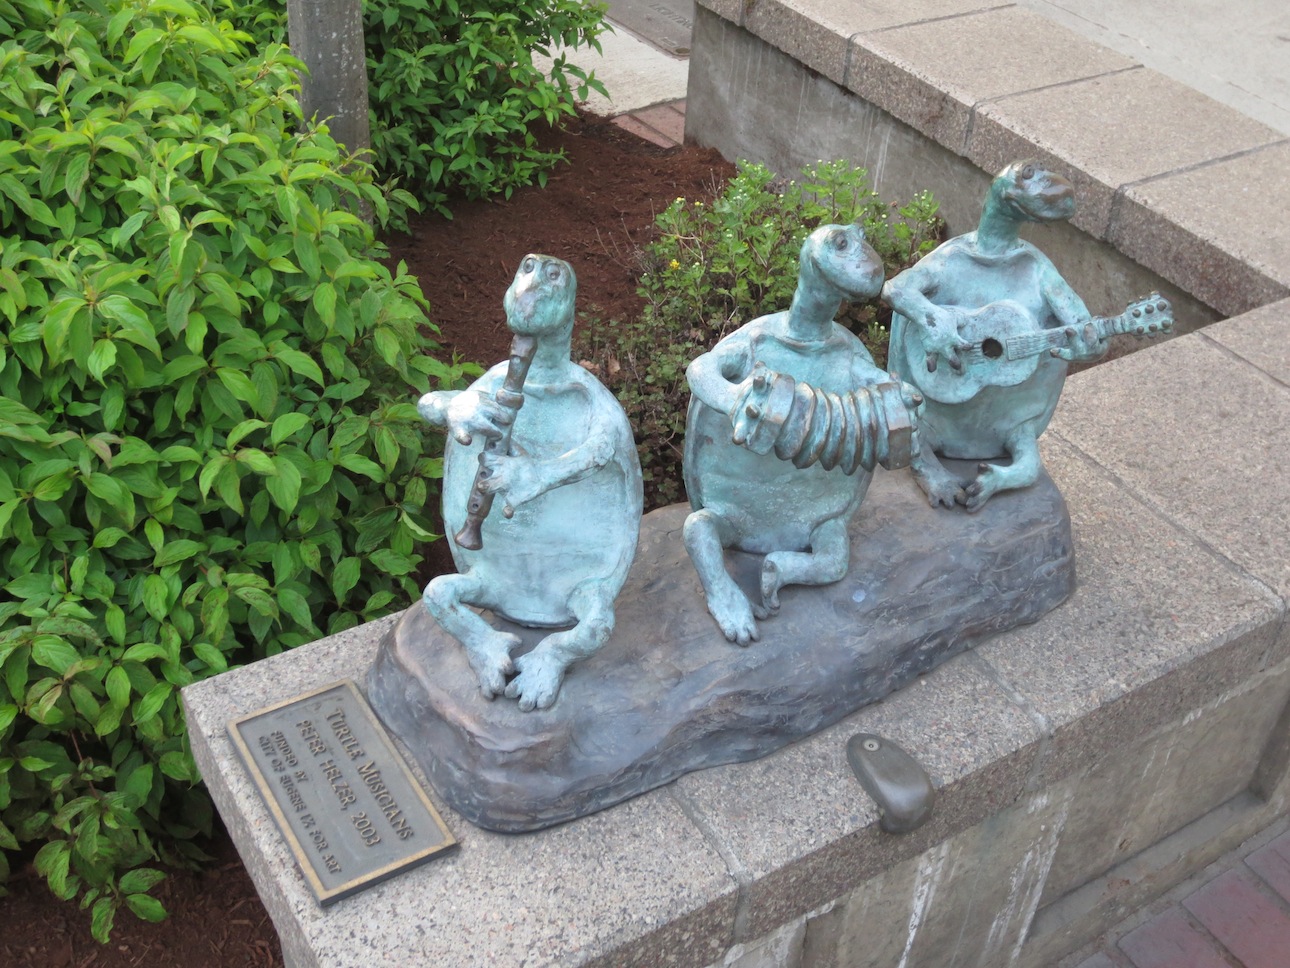 Statue of musical instrument playing turtles.